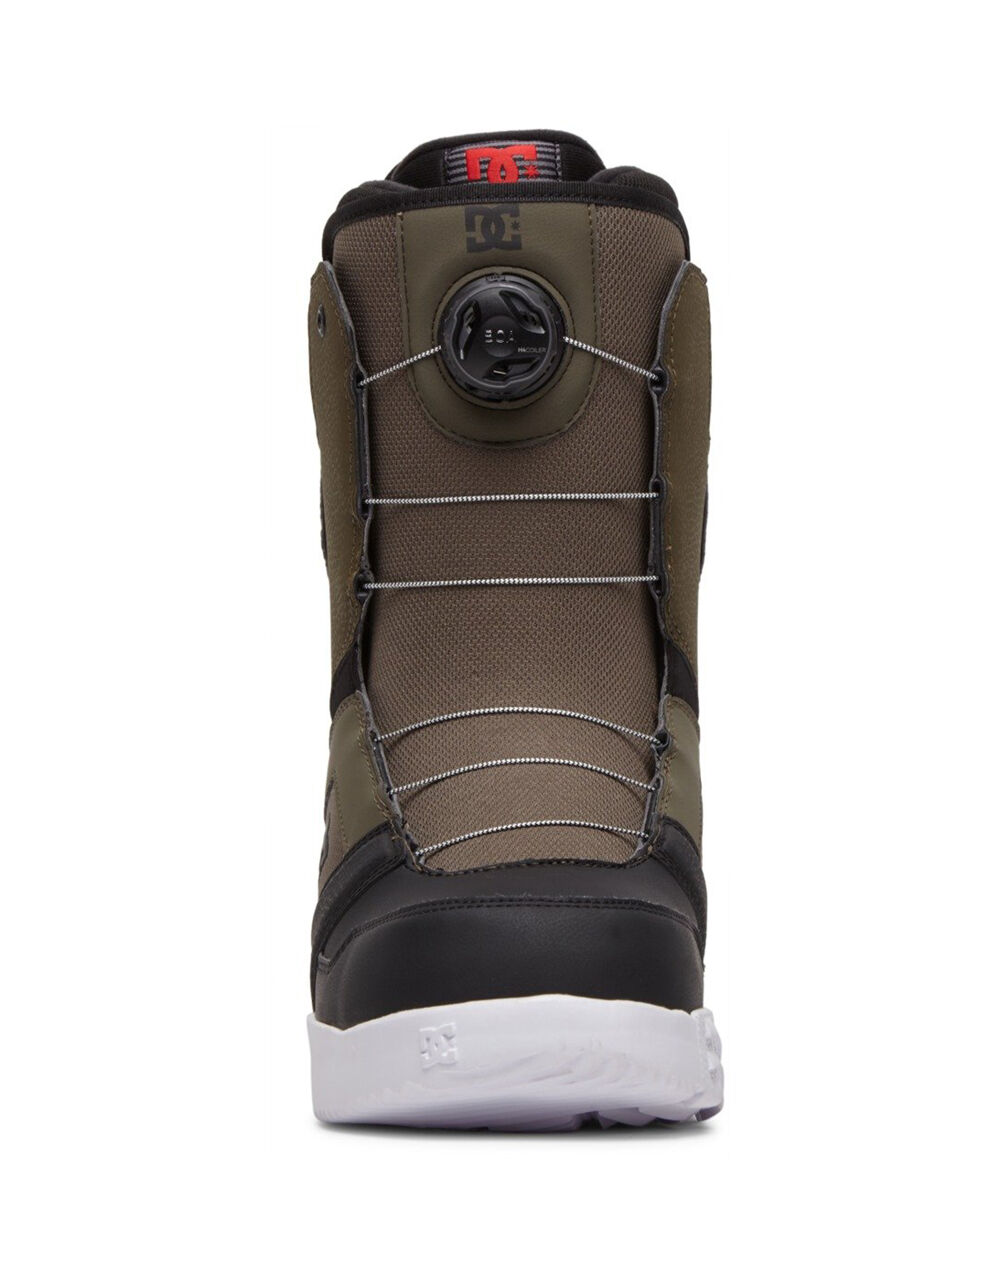 DC SHOES Scout BOA Mens Snowboard Boots - GREEN | Tillys